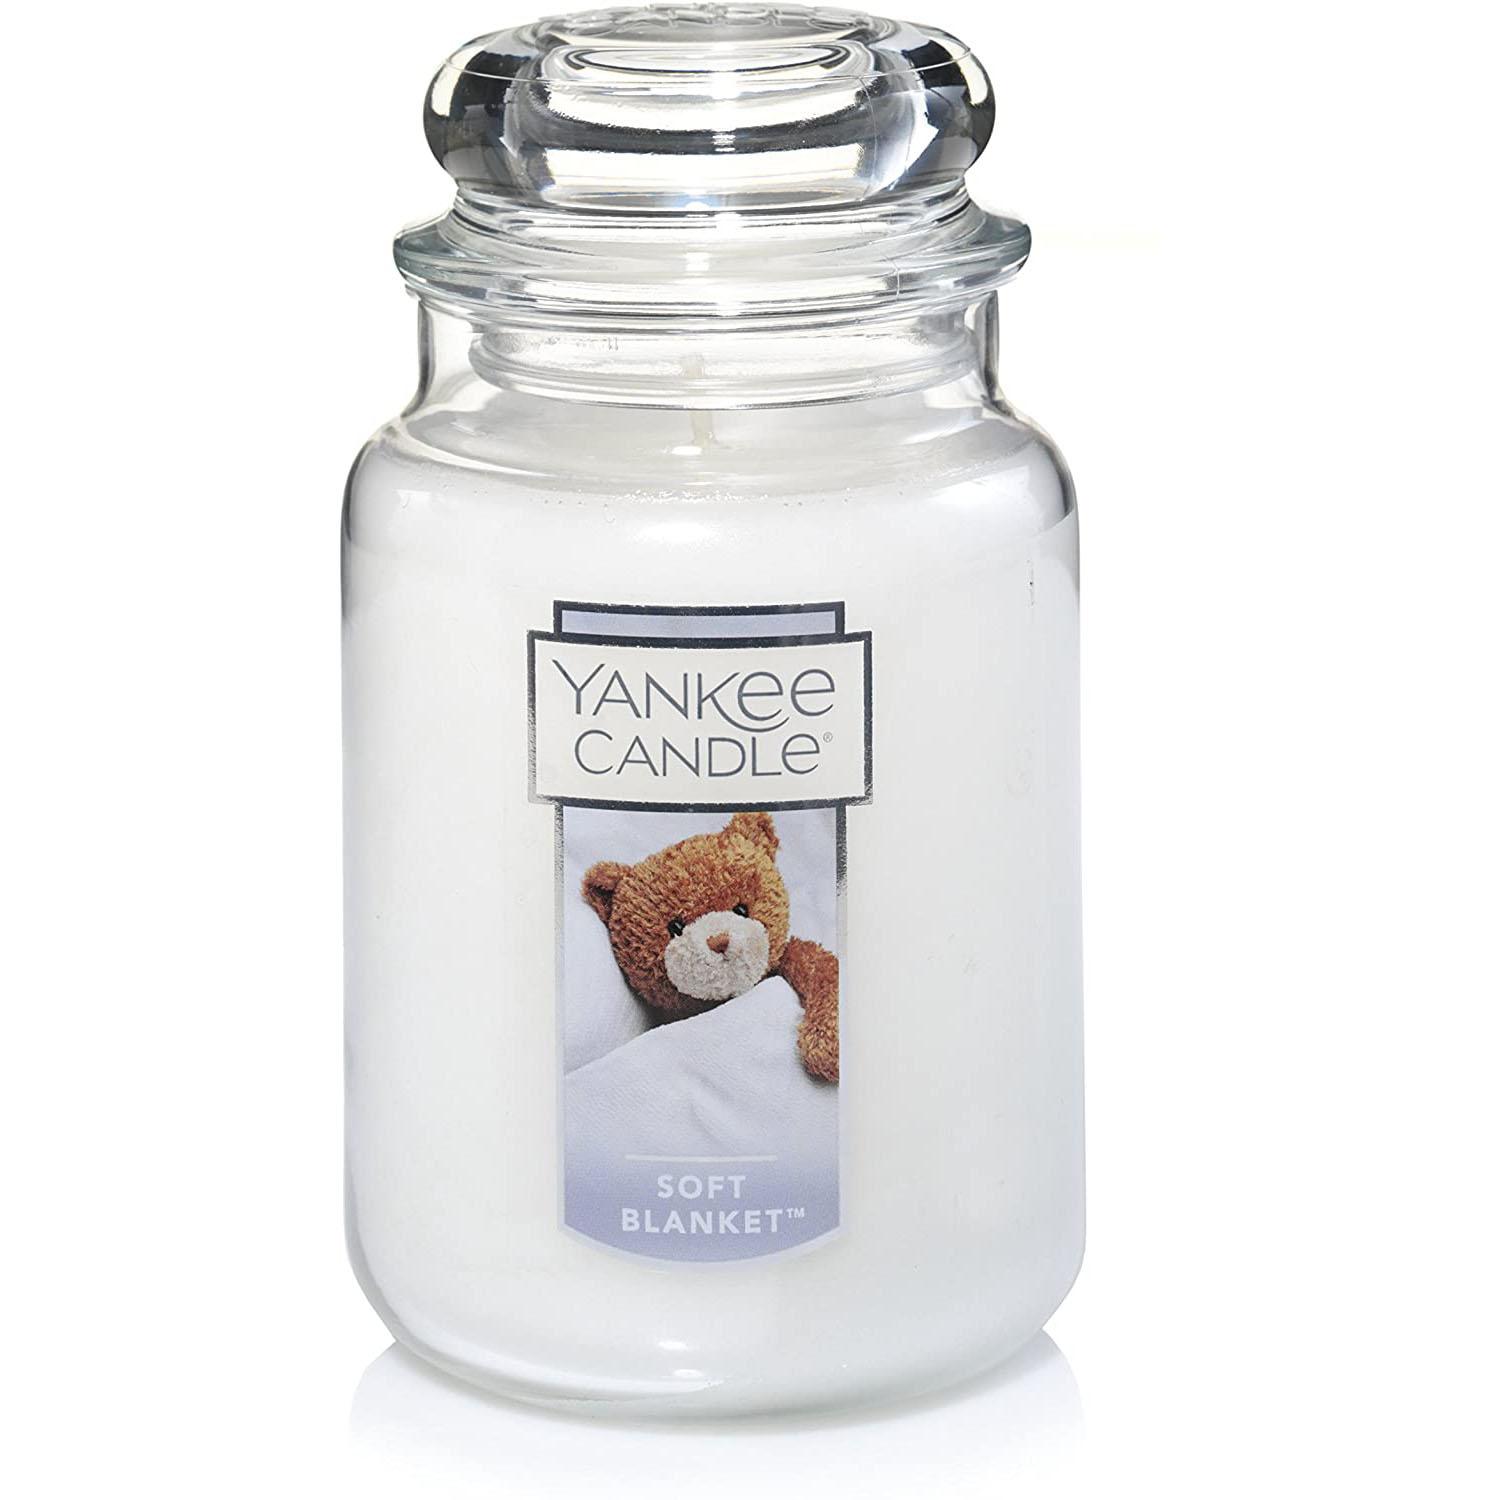 Yankee Candle Soft Blanket Scented Premium Large Jar for $18.27